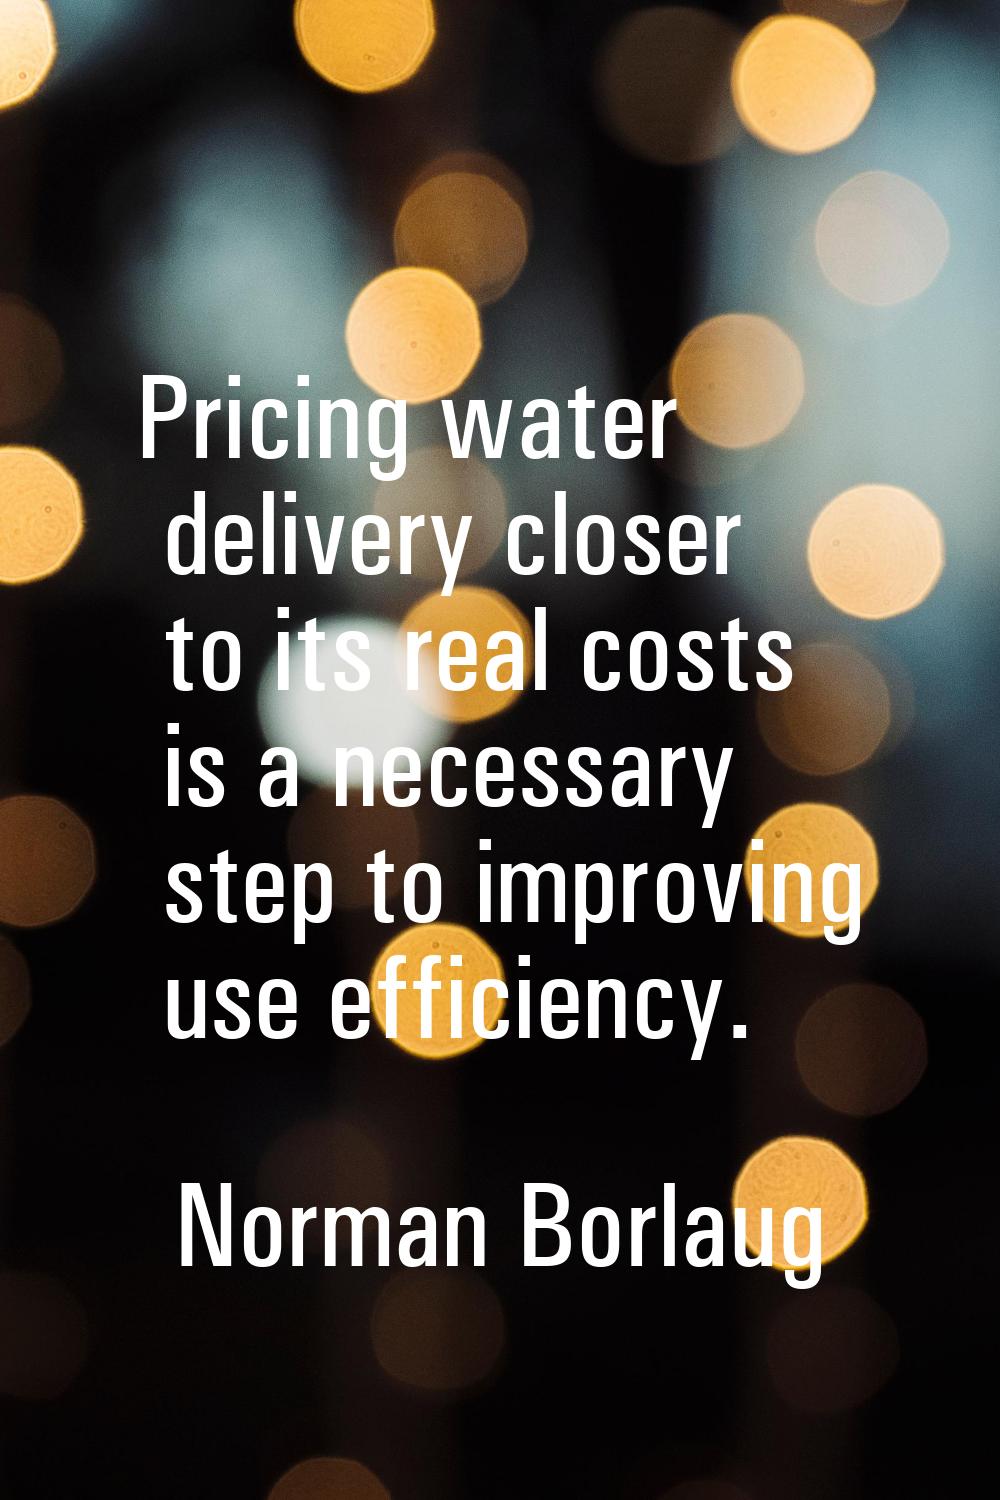 Pricing water delivery closer to its real costs is a necessary step to improving use efficiency.